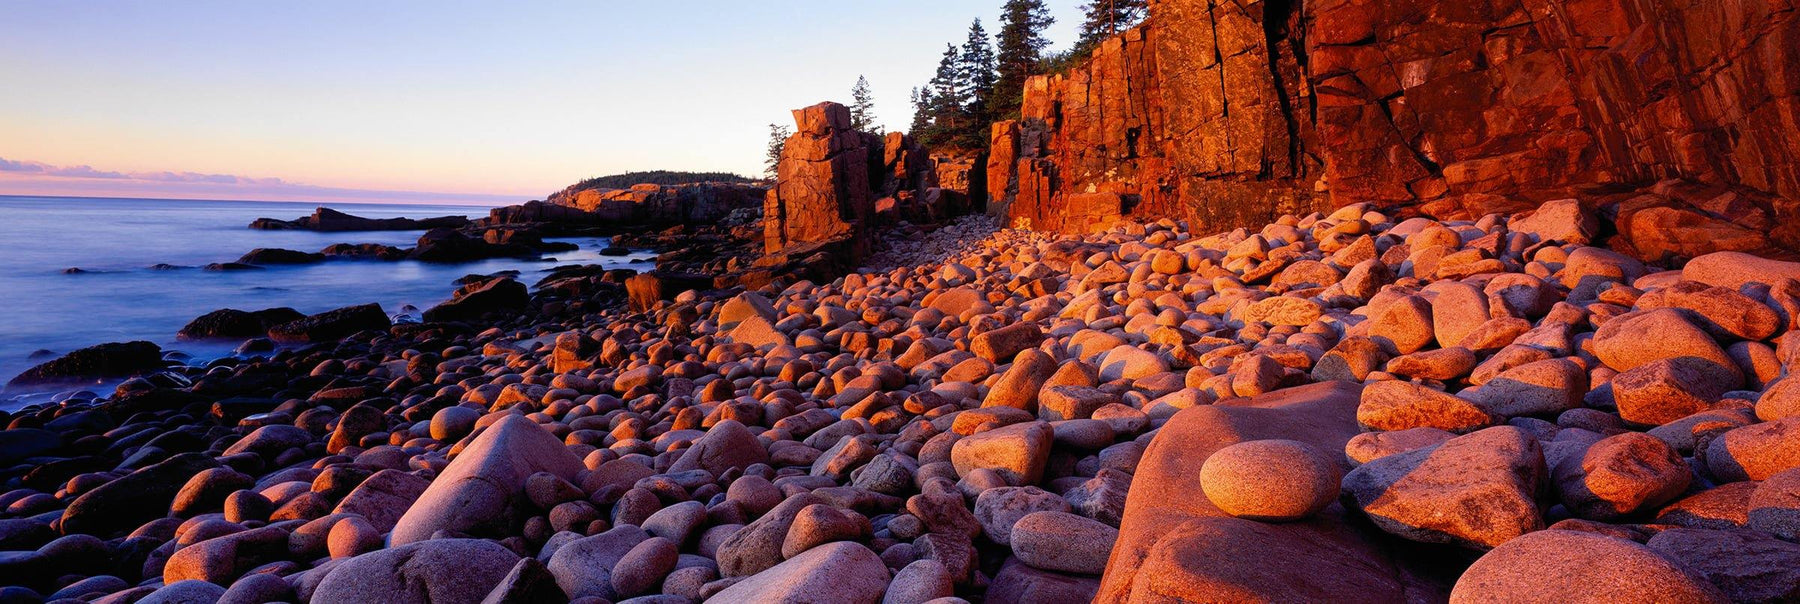 Rock beach at low tide next to a forest cliff at Acadia National Park Maine during sunrise